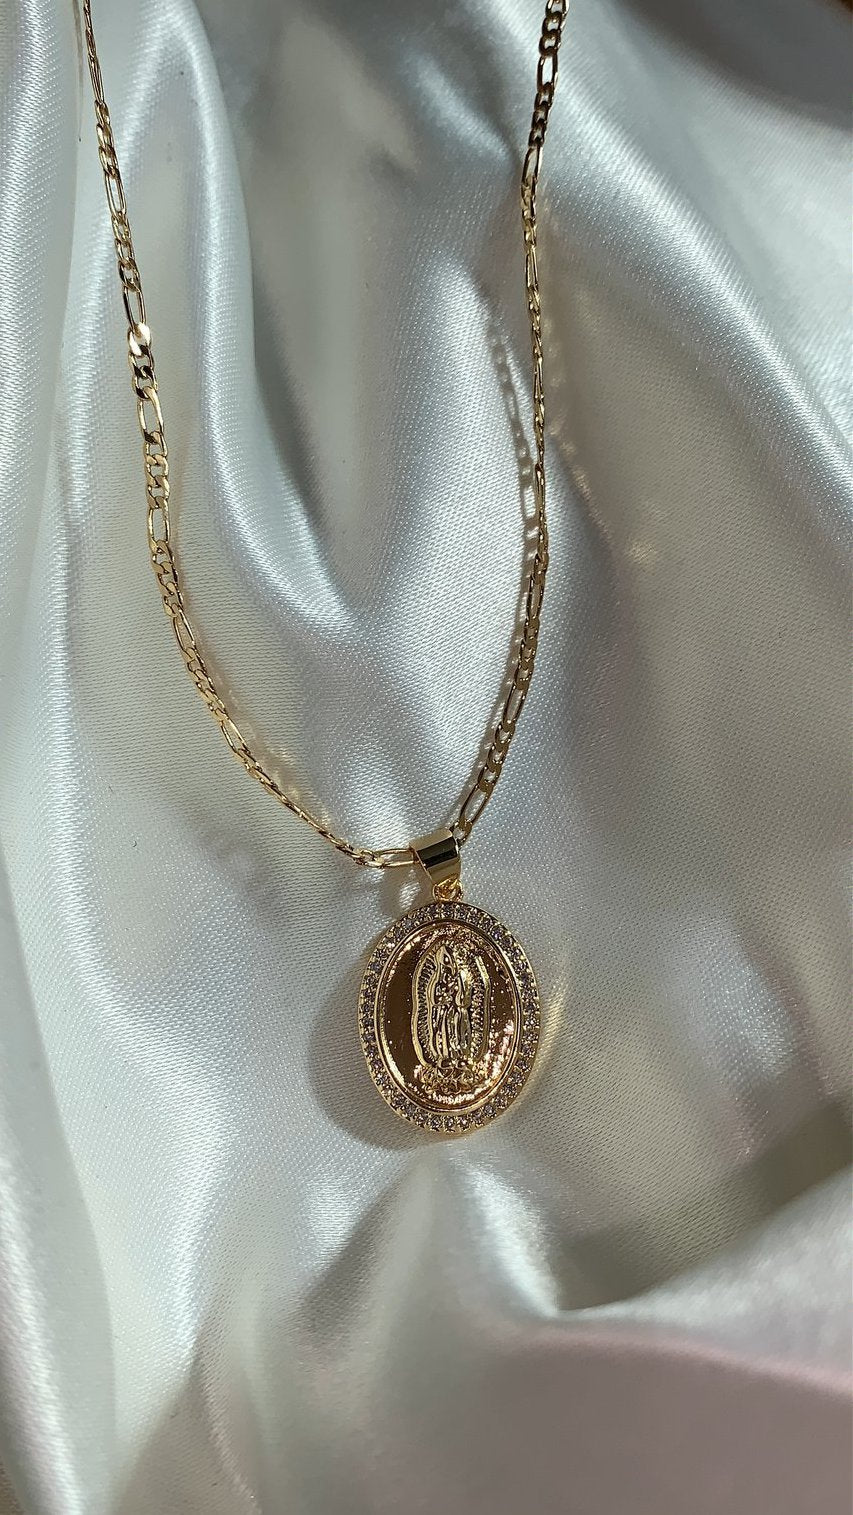 Tiny Virgin Mary Necklace Gold Filled